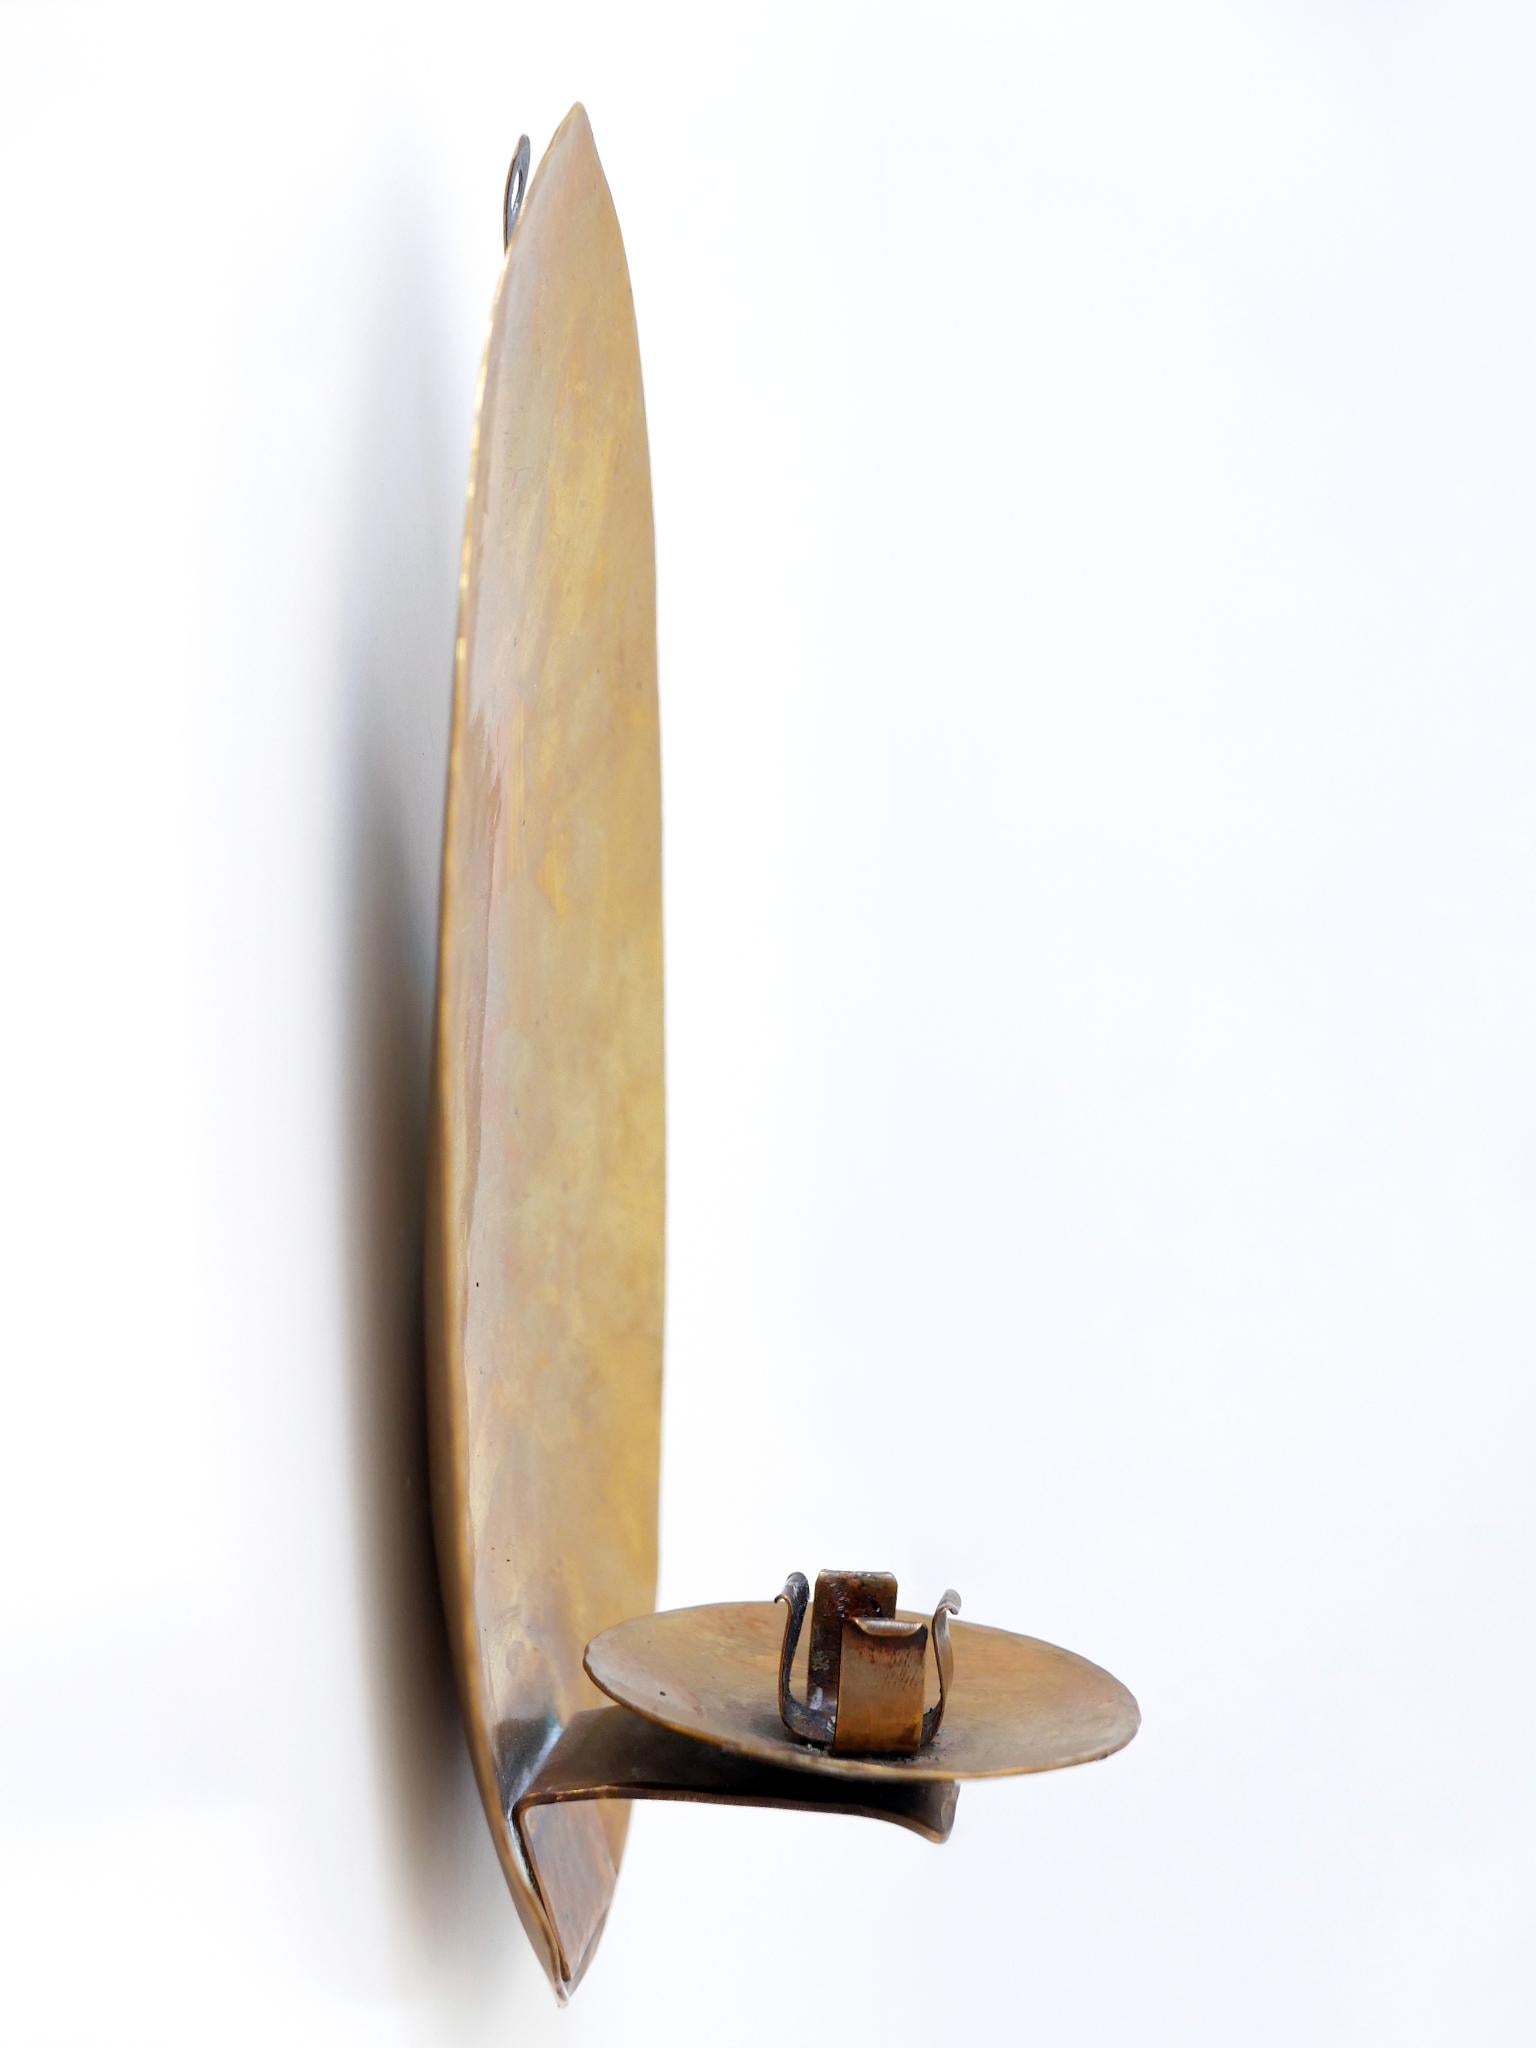 Elegant Hammered Brass Bauhaus Candle Sconce 1930s Germany For Sale 1